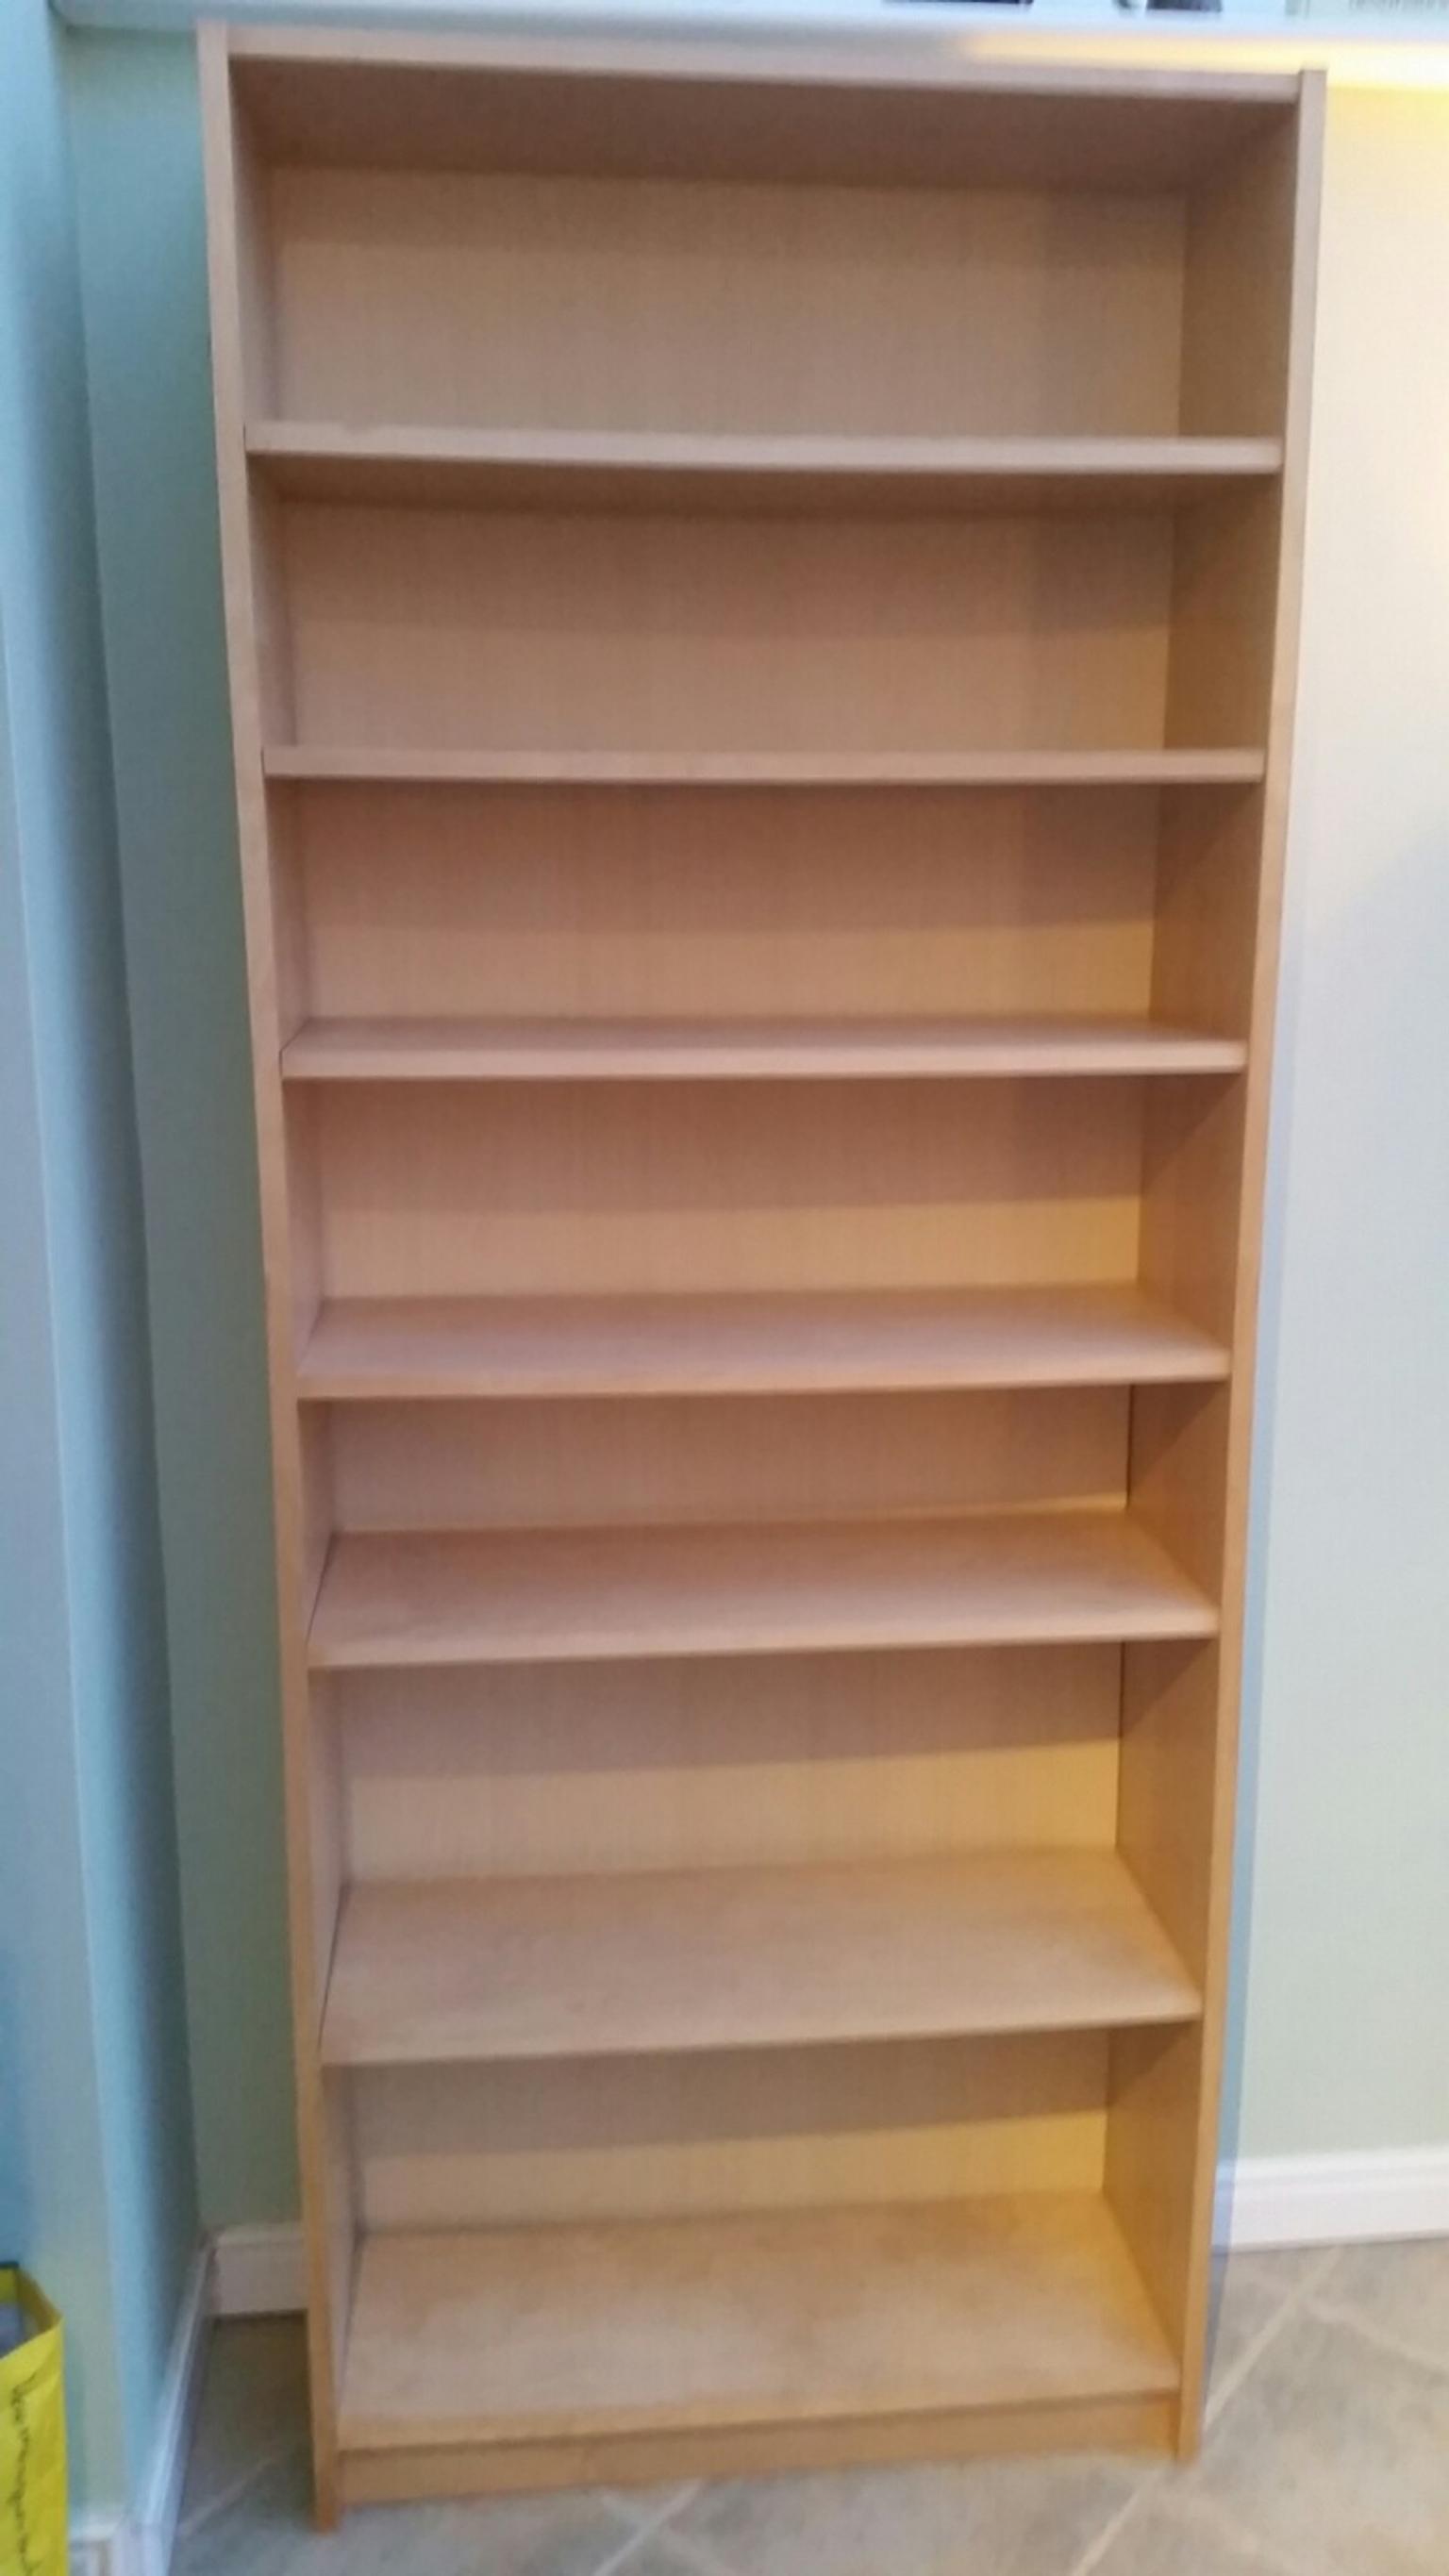 Bookcase Bookshelf Ikea In Gwernaffield For 15 00 For Sale Shpock